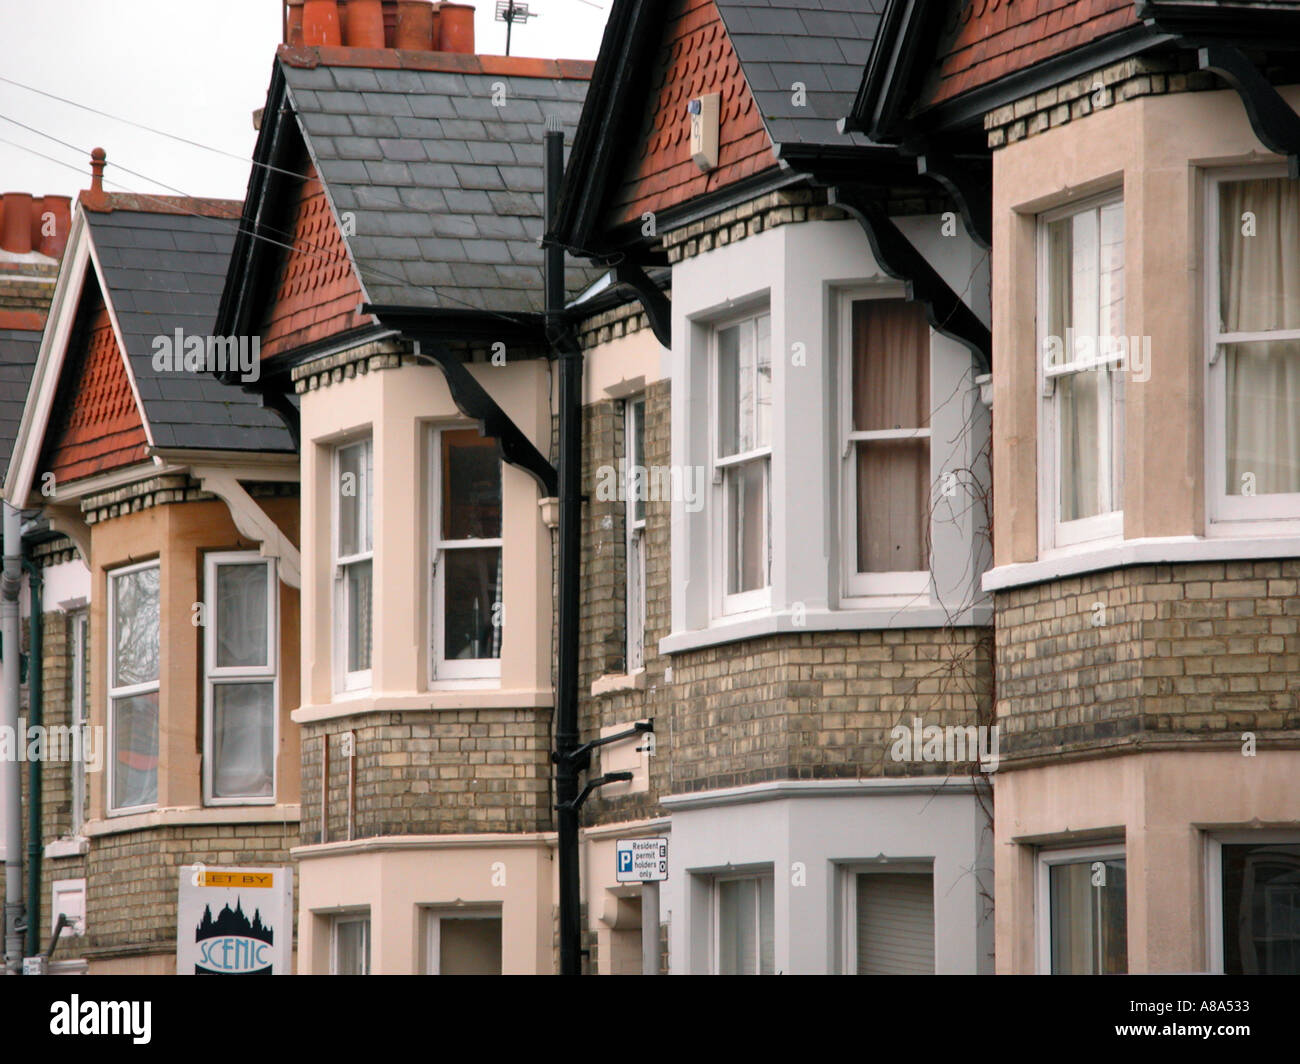 Row of Period Houses in UK united kingdom Stock Photo